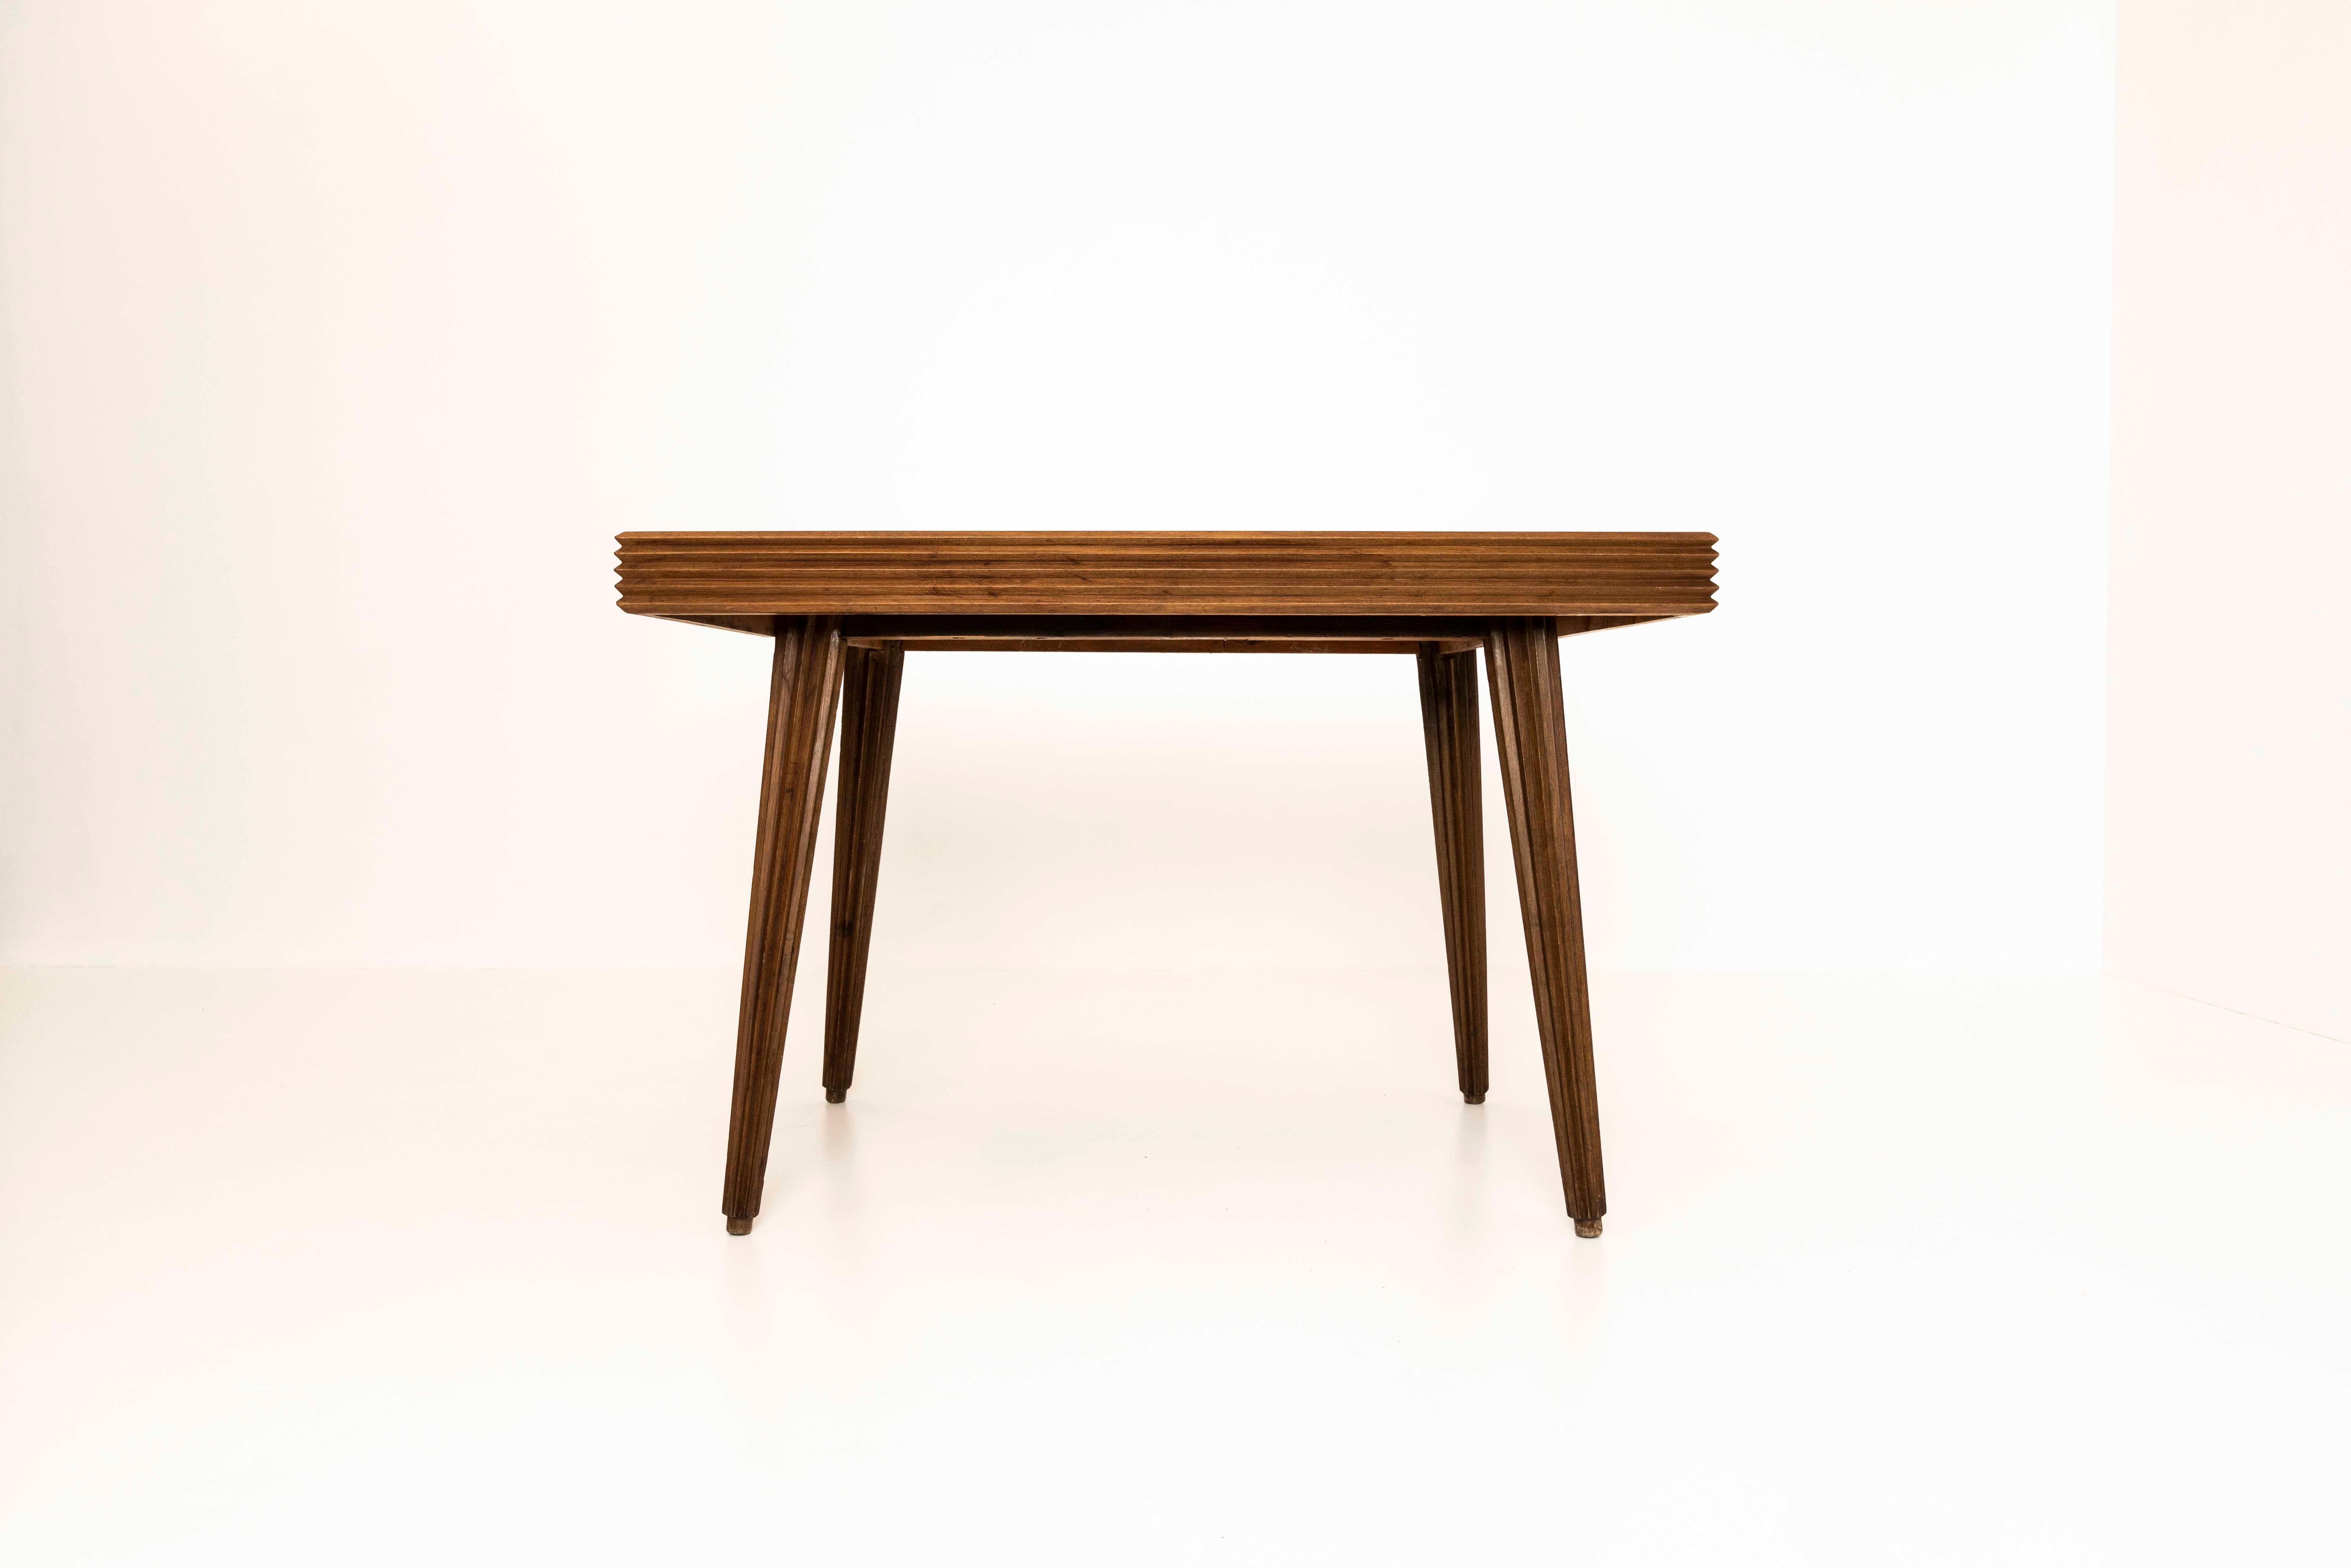 Amazing dining table by Gio Ponti from the early 1940s, Italy. It has a rectangular top in veneered Italian walnut with underneath four tapered fluted legs. A similar striking fluted, grooved pattern can also be found in the edges of the table. It